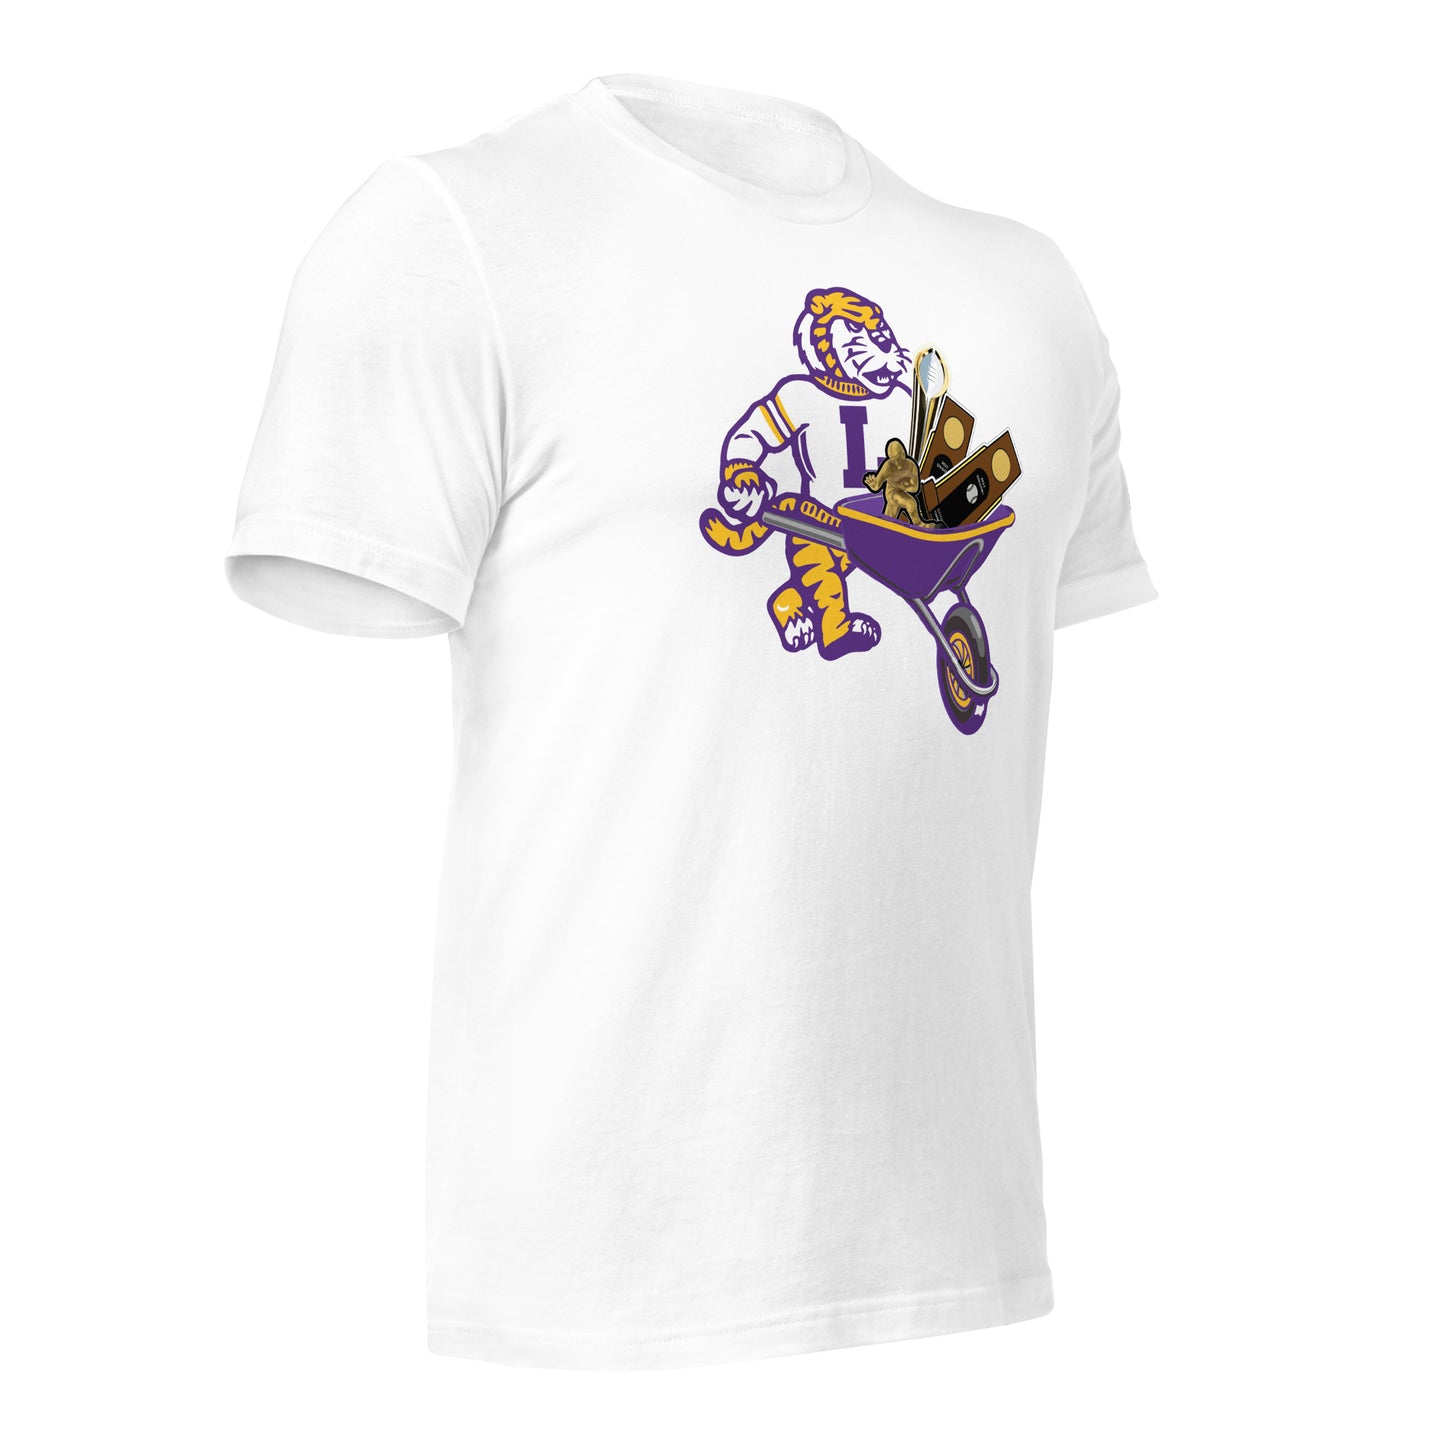 TROPHY MIKE / YEAR OF THE TIGER - BELLA+CANVAS - Unisex T-shirt